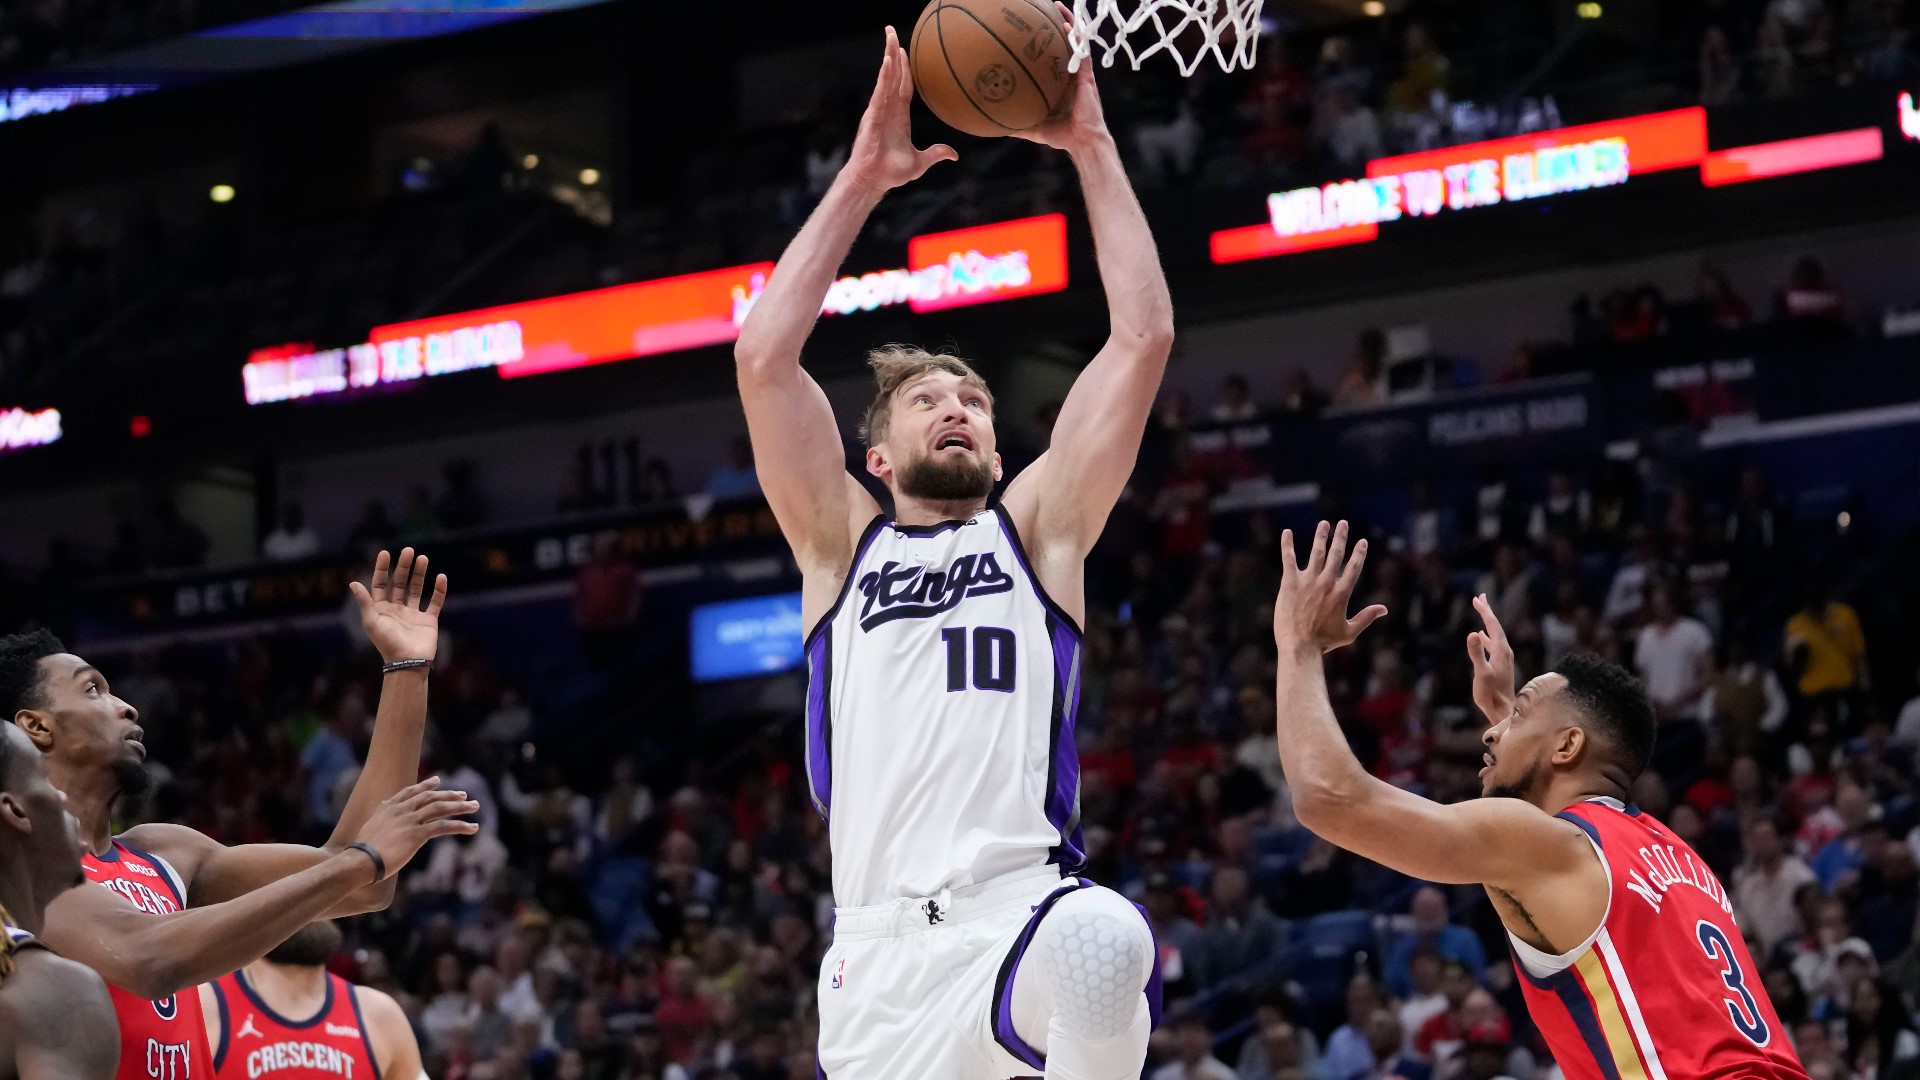 The New Orleans Pelicans booked a spot in the NBA playoffs with a 105-98 victory over the Sacramento Kings in a play-in tournament elimination game.